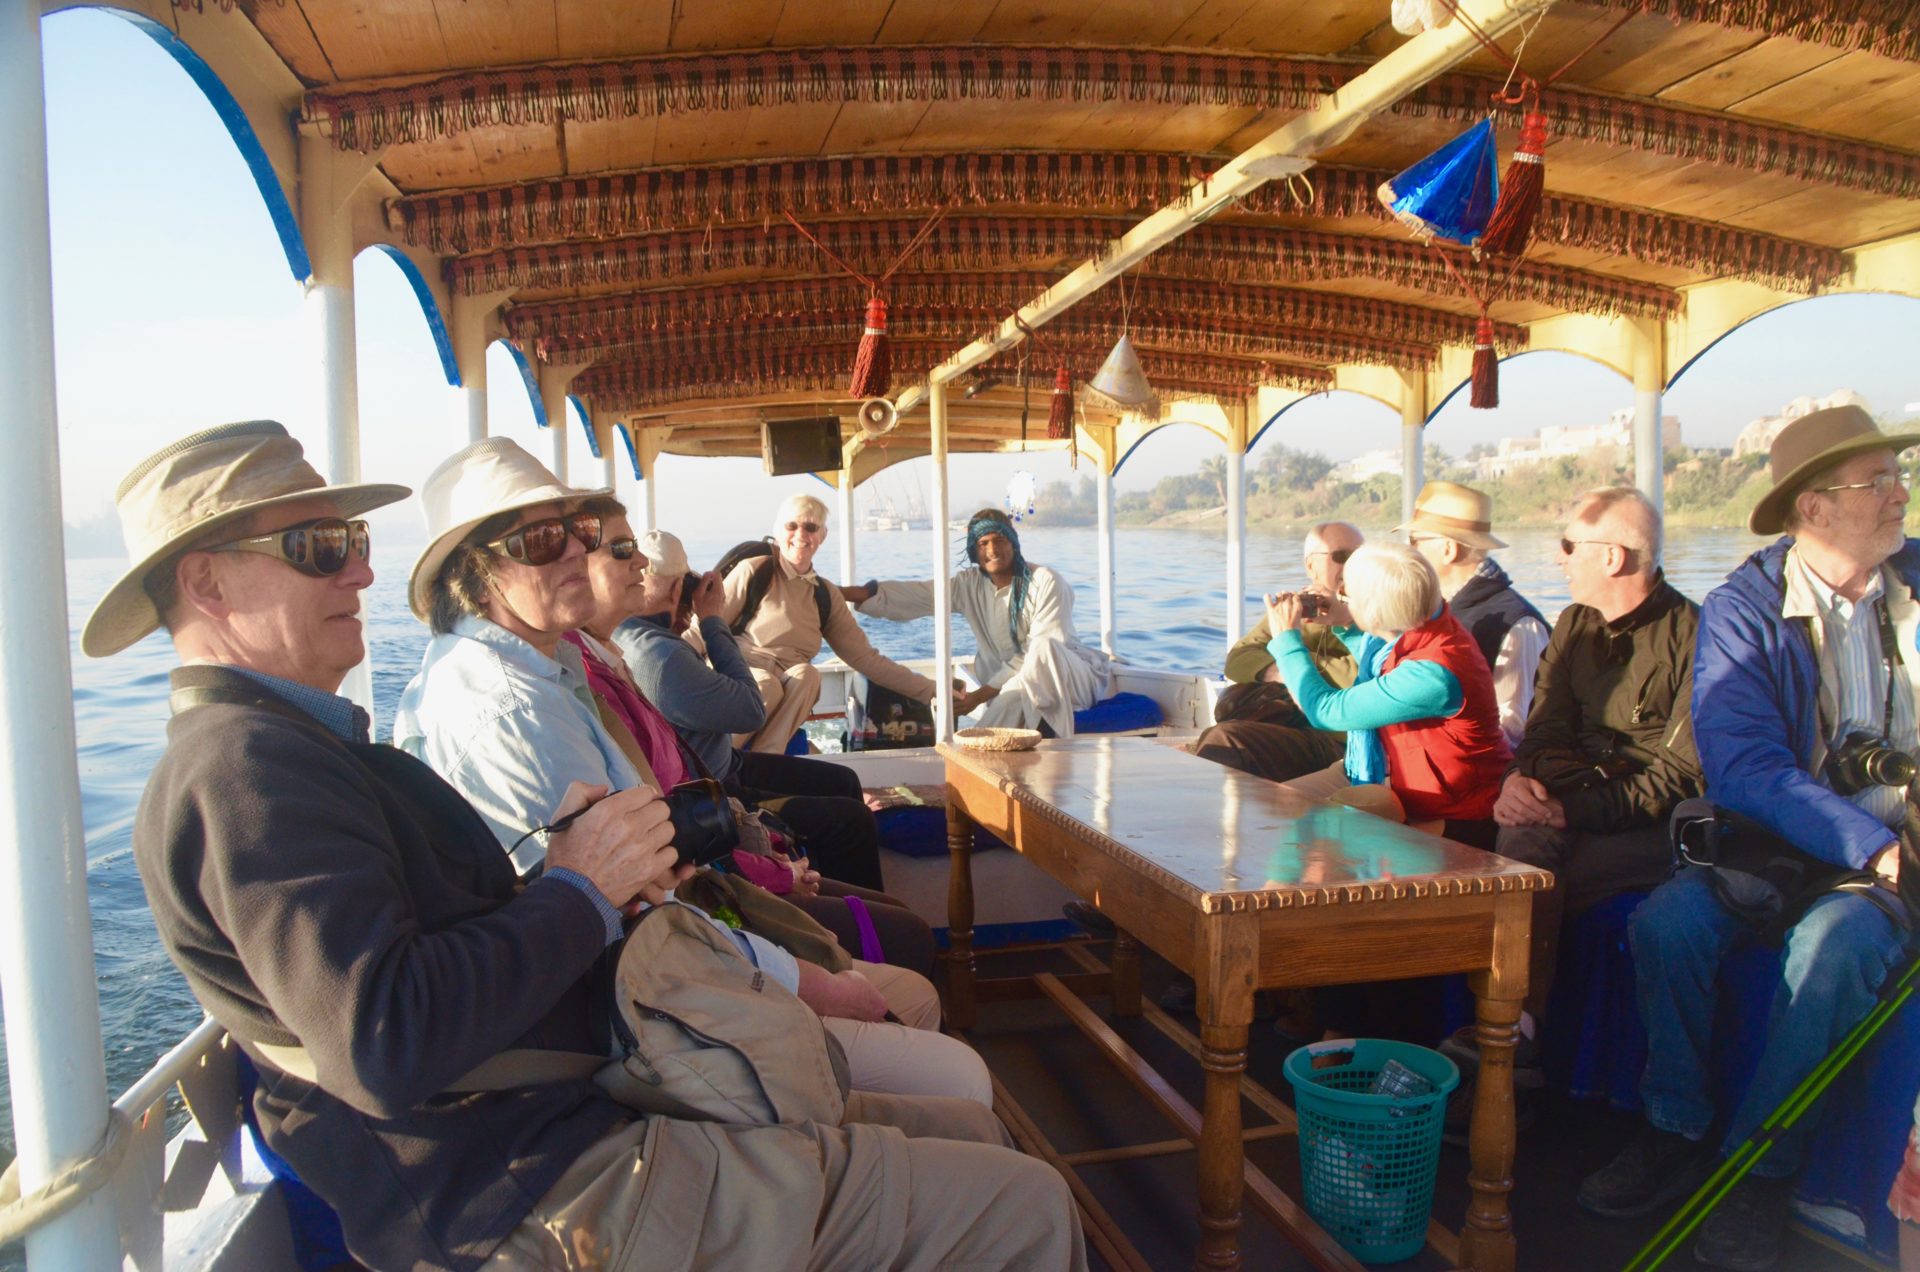 Crossing the Nile to the Valley of the Kings